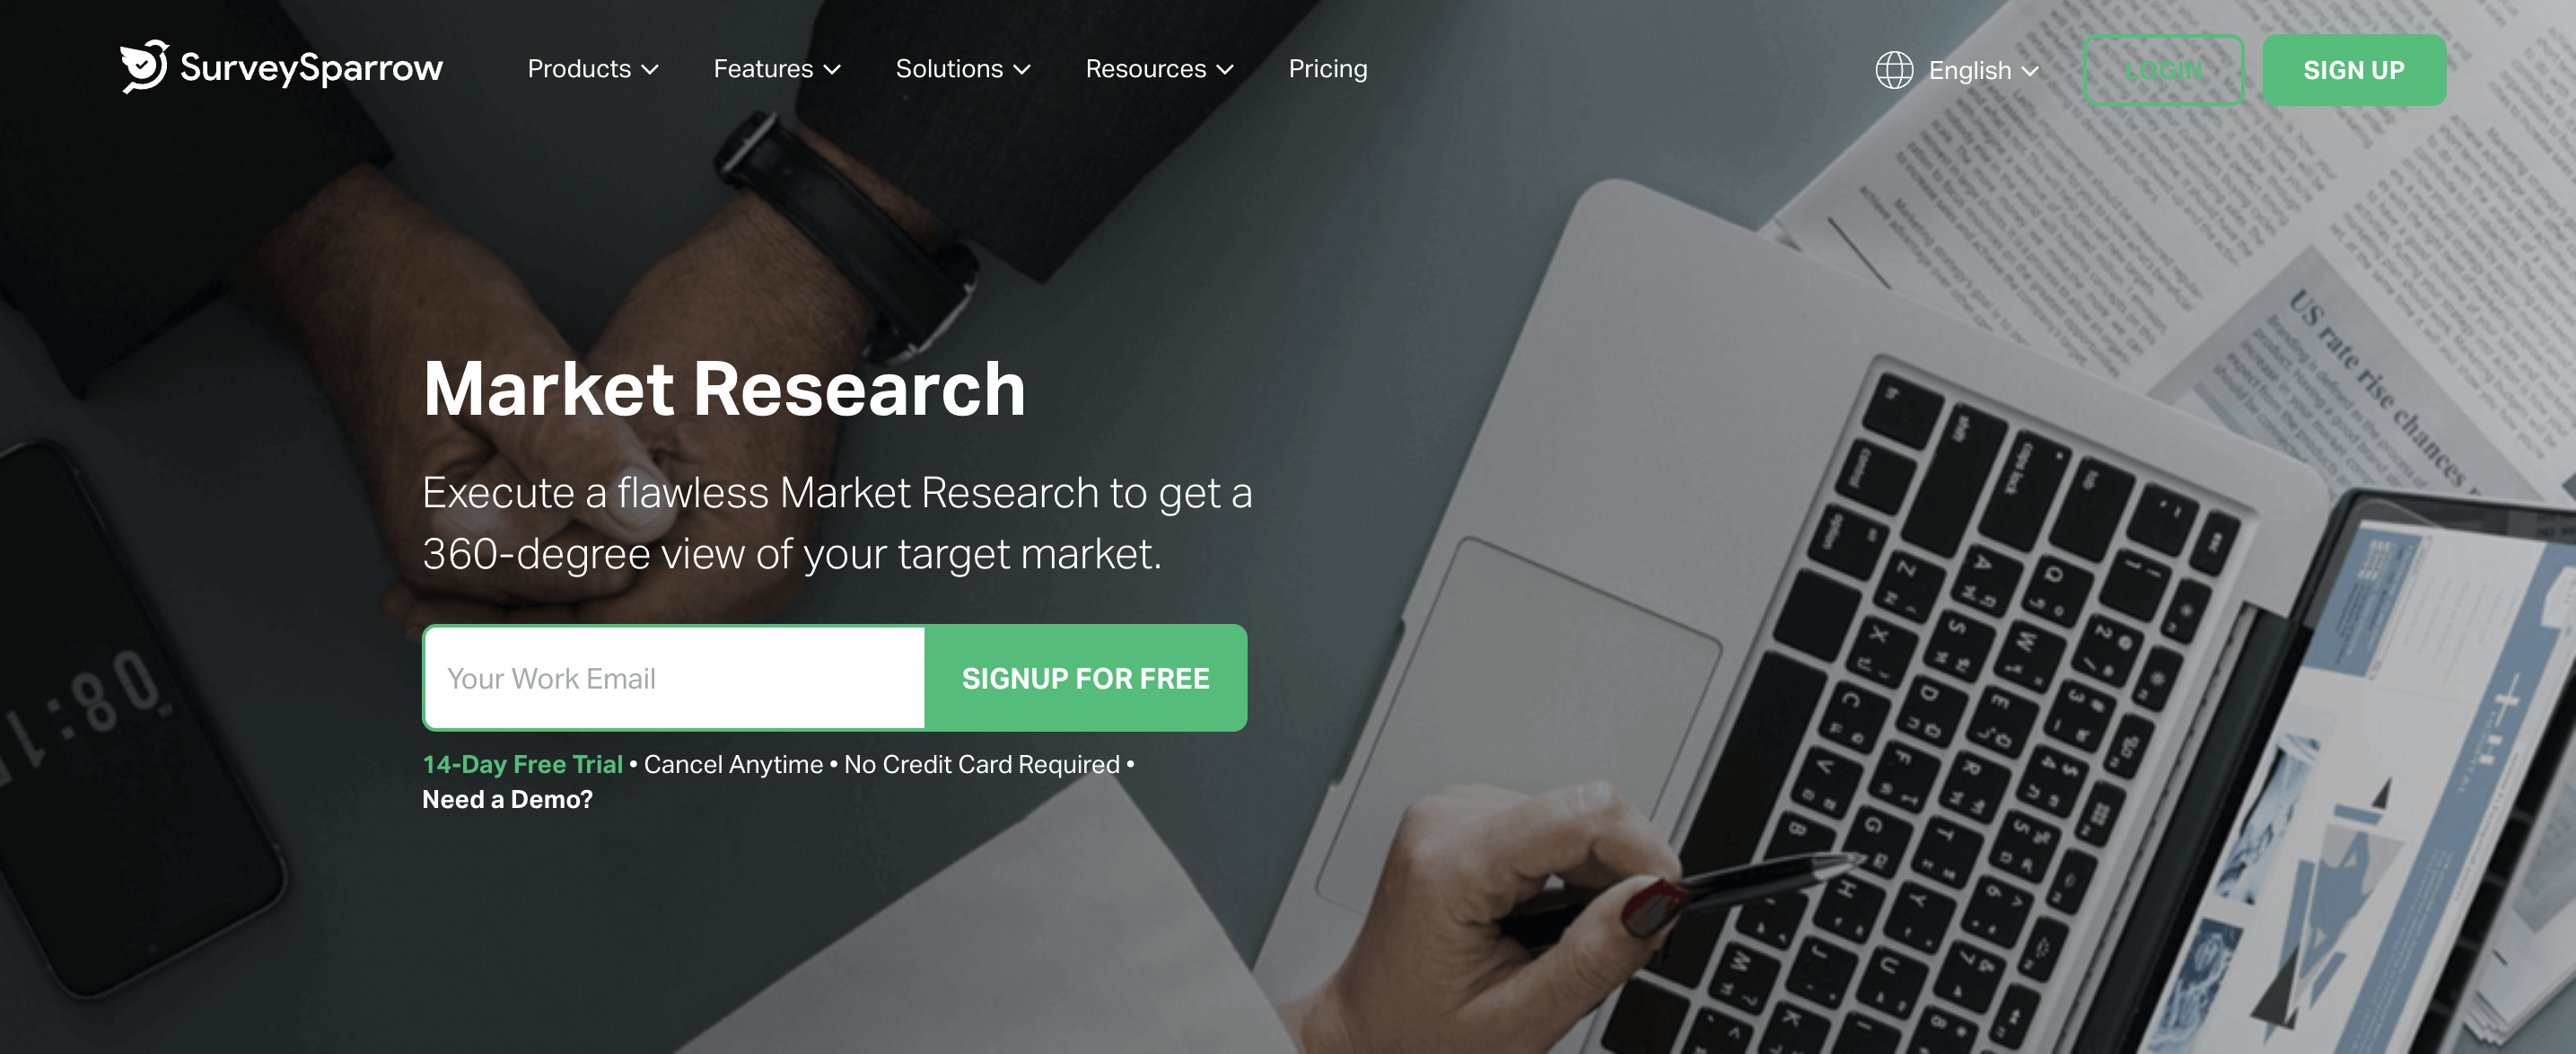 SurveySparrow is a powerful tool for conducting market research surveys